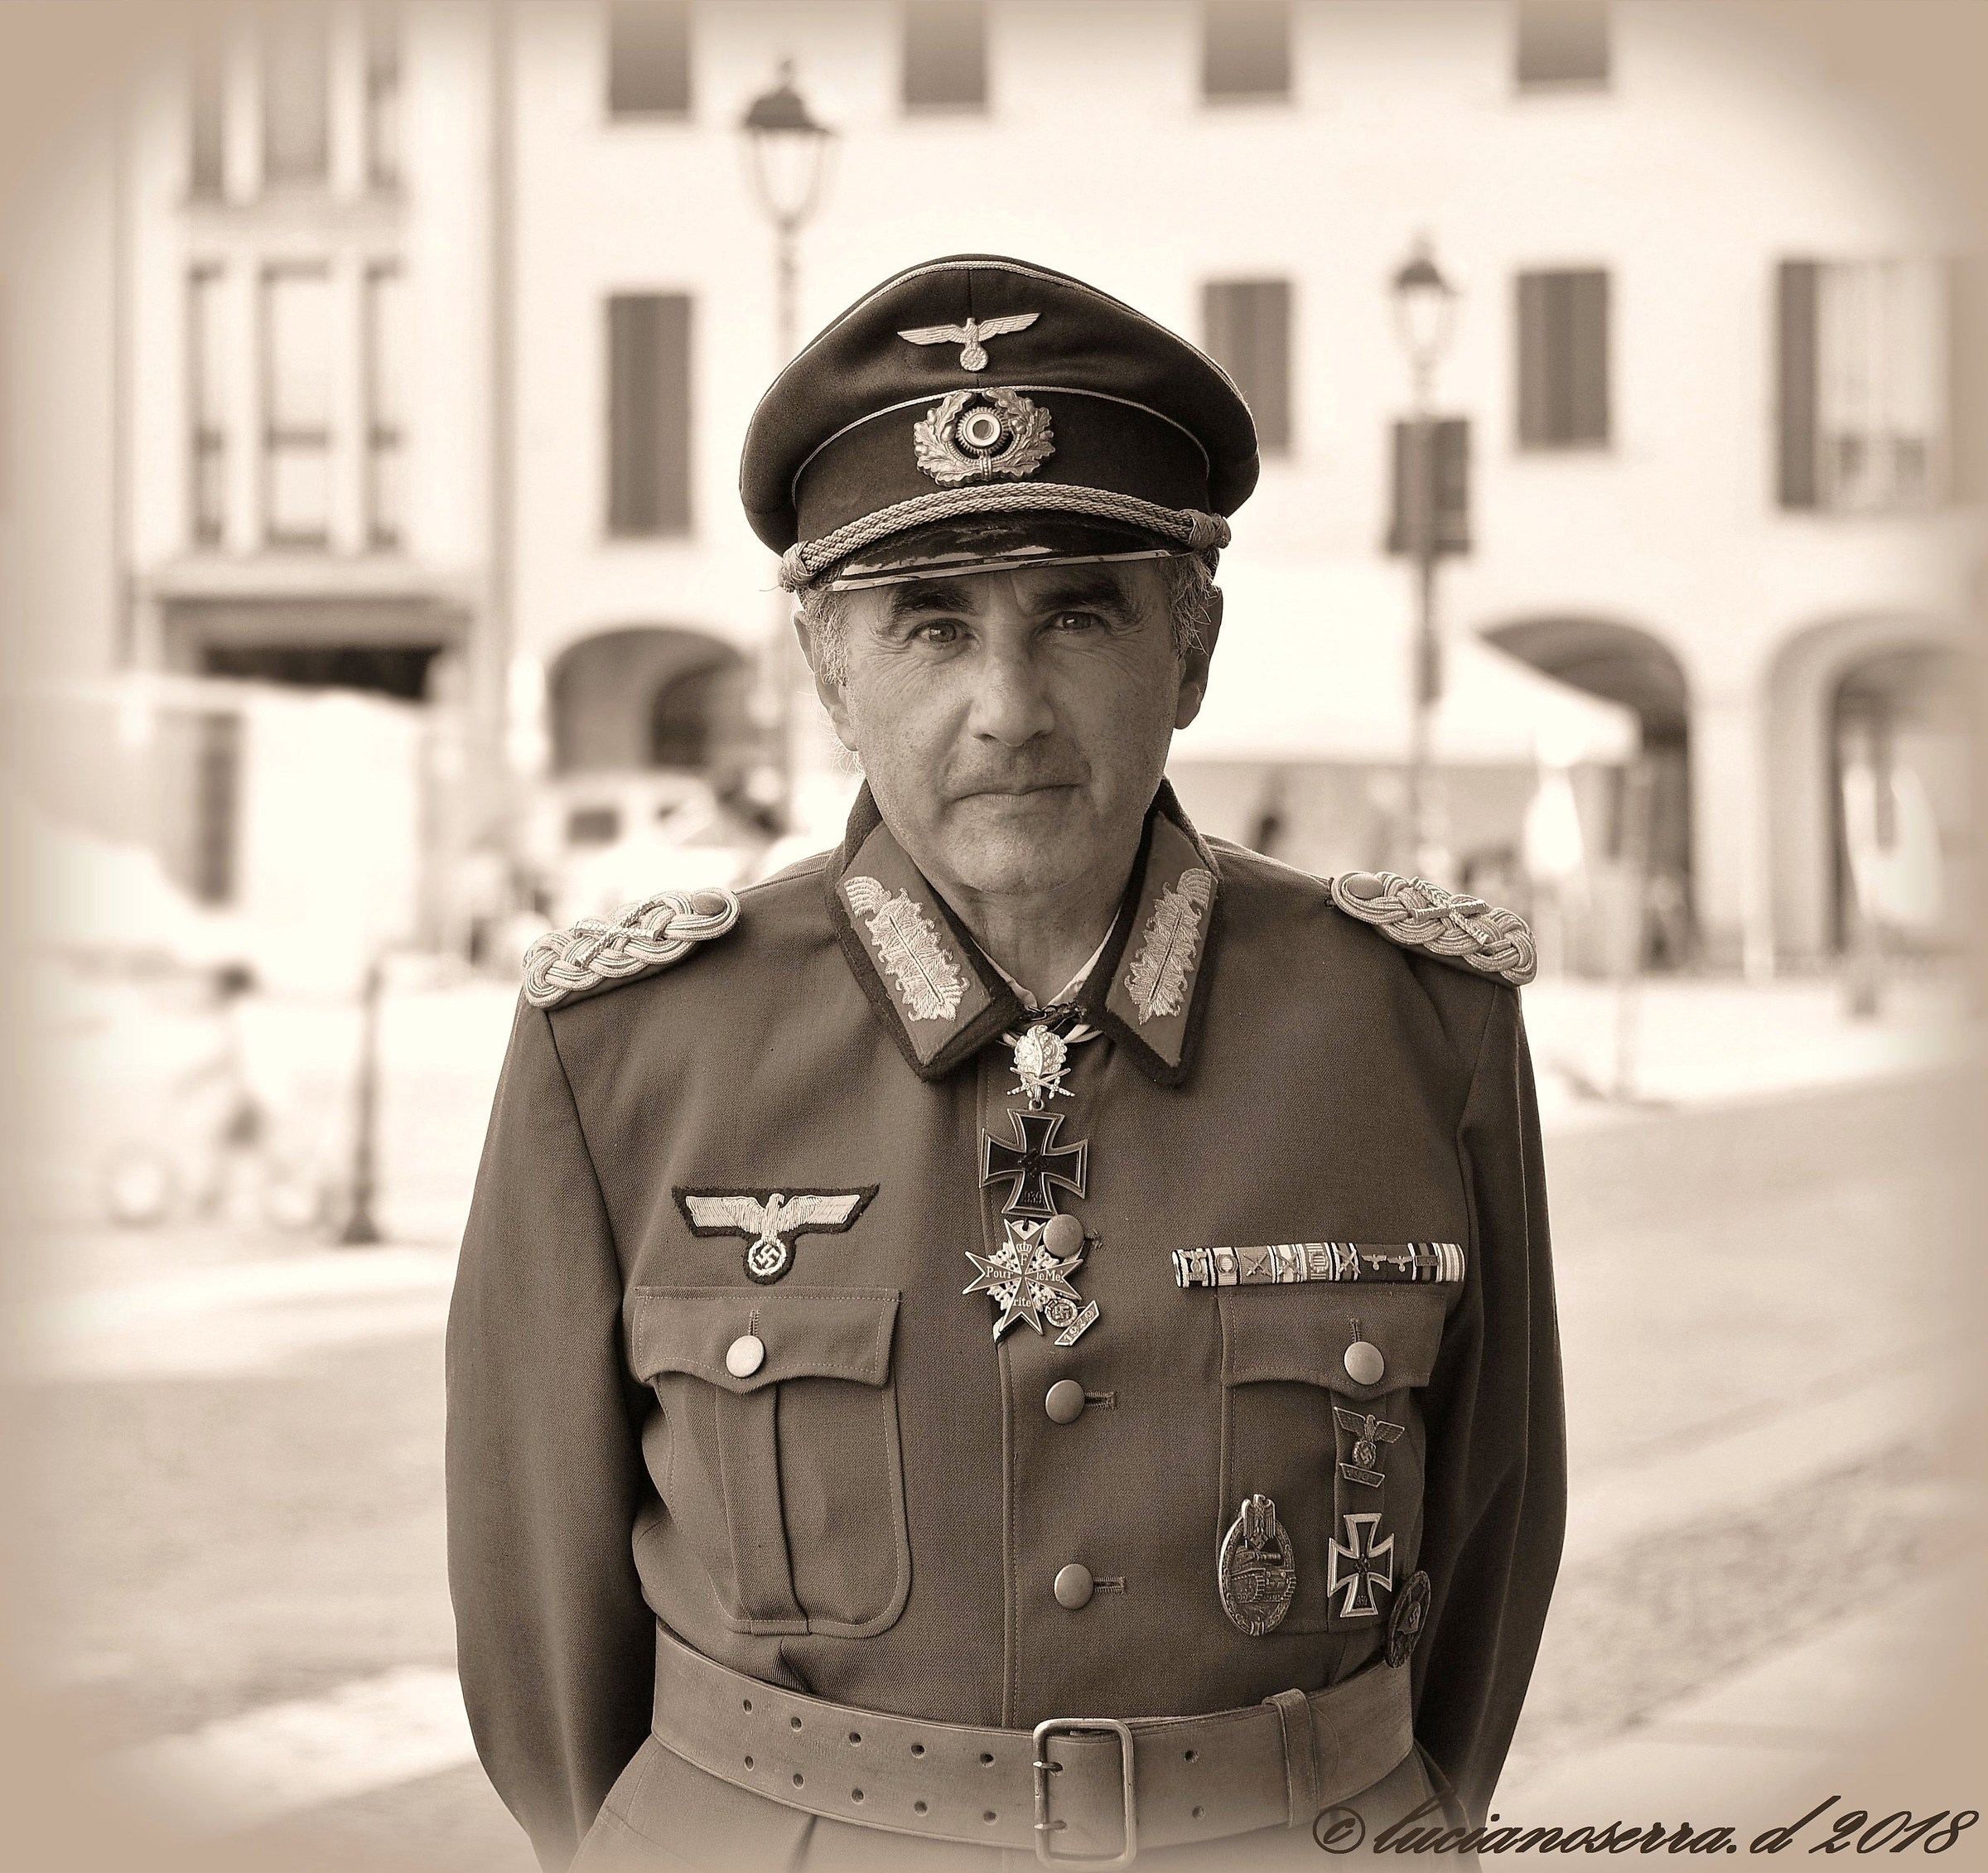 Figuratively with military uniform of the World War II...